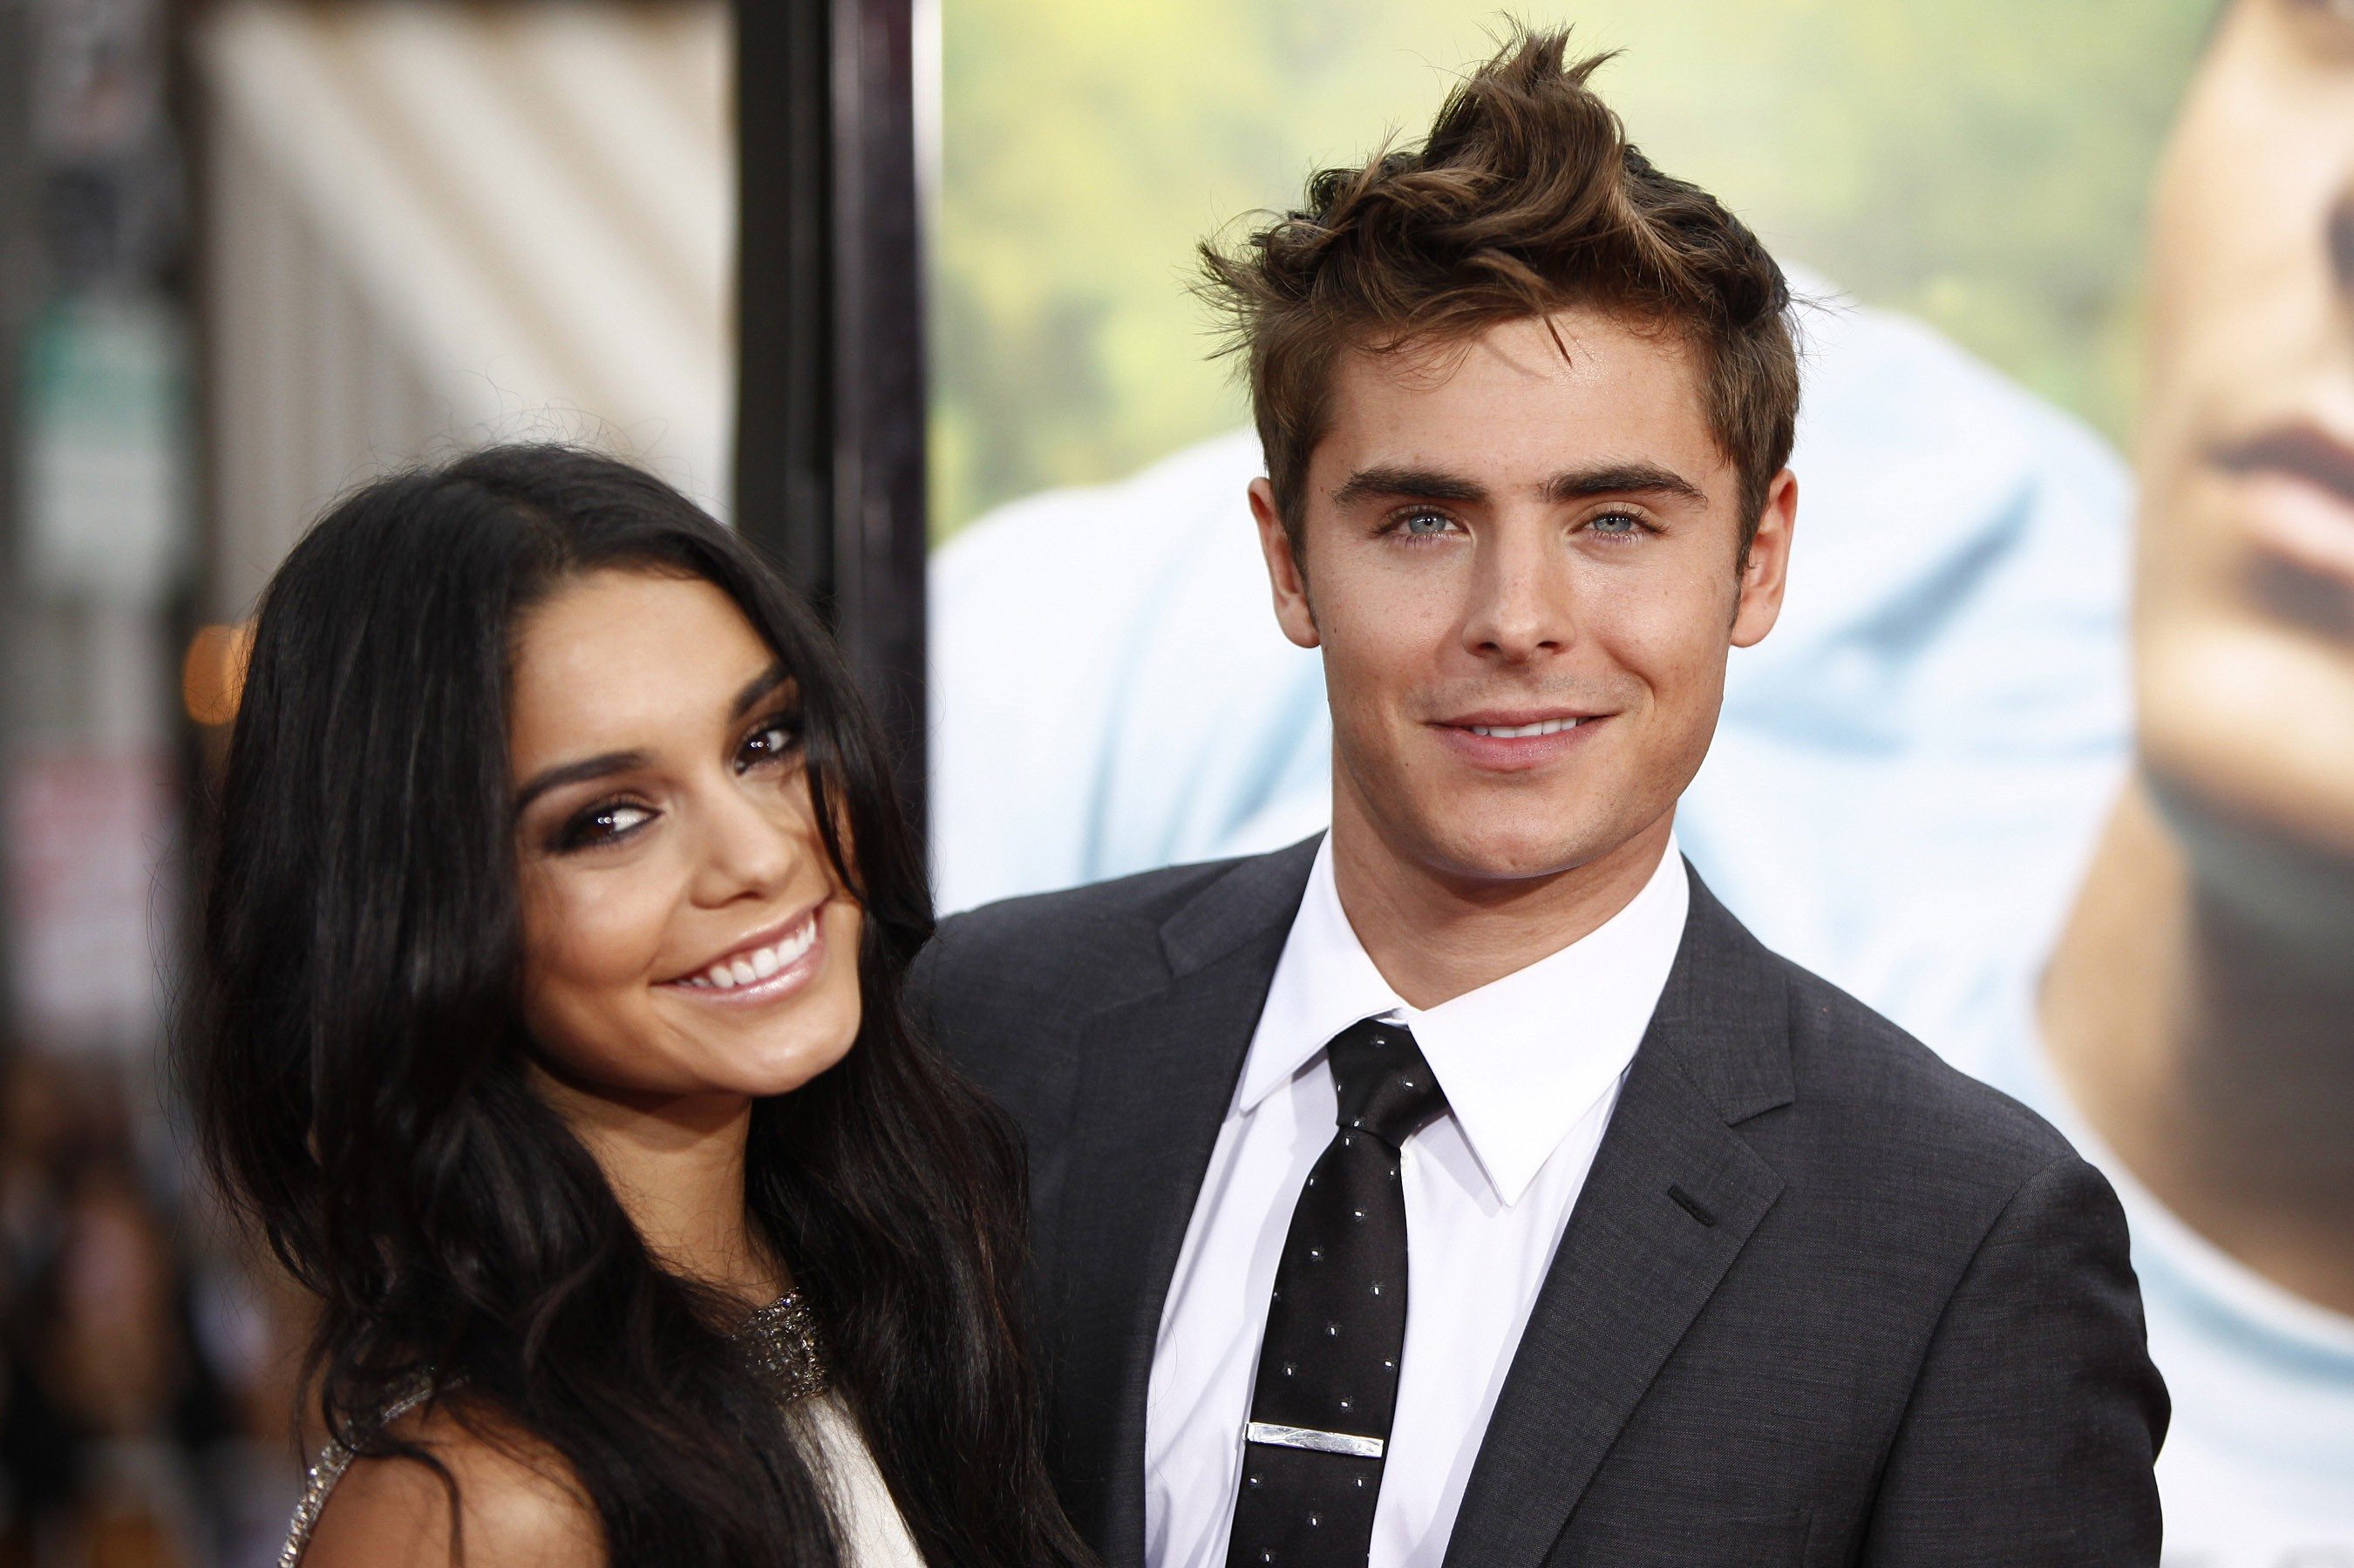 Vanessa Hudgens And Zac Efron Talk About Their First Kiss As A Couple 20